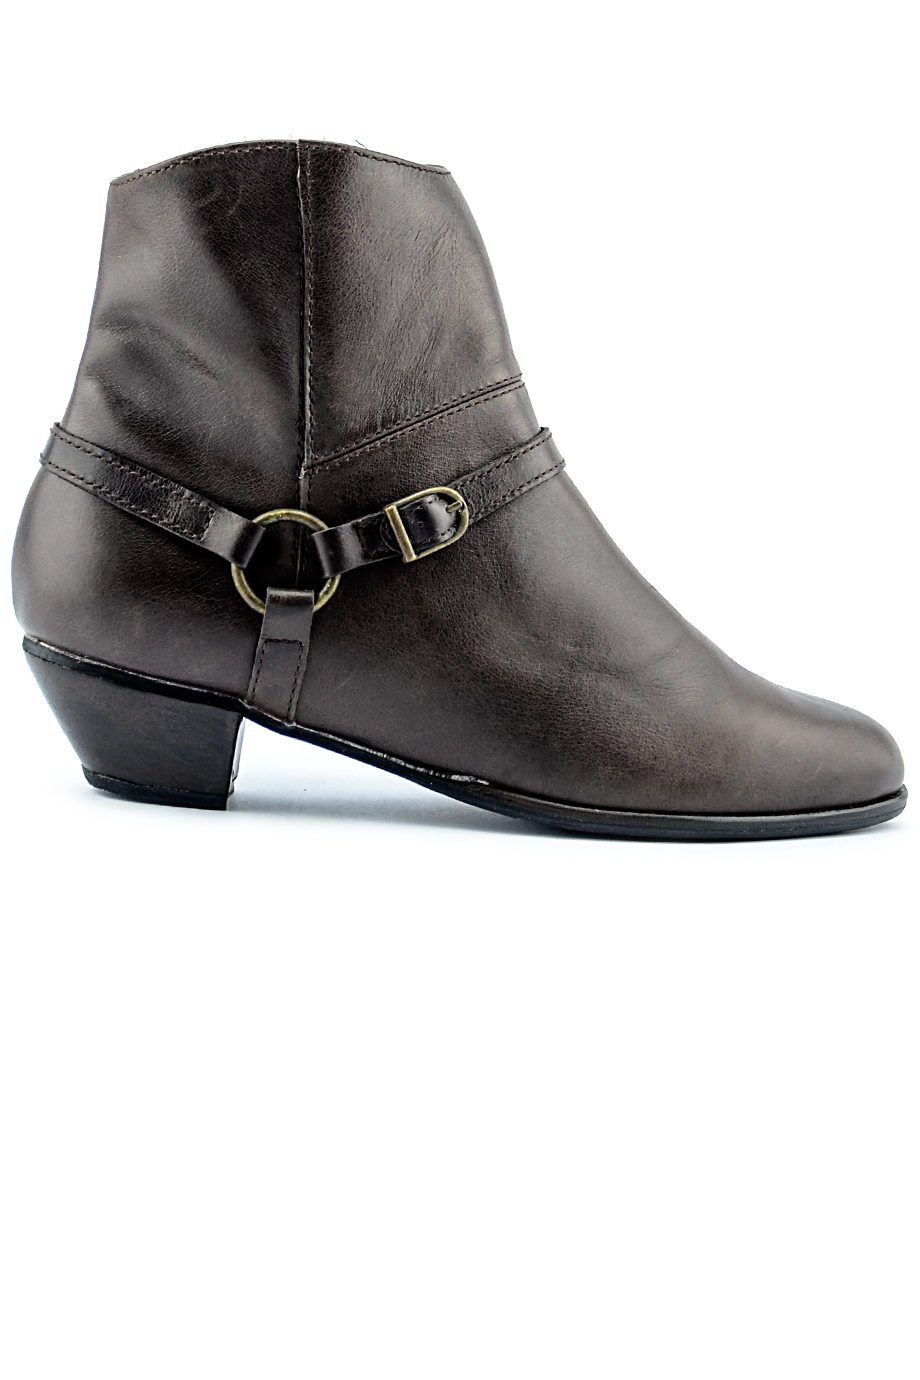 CLELO Leather 4cm-heeled Boots/ Hickory